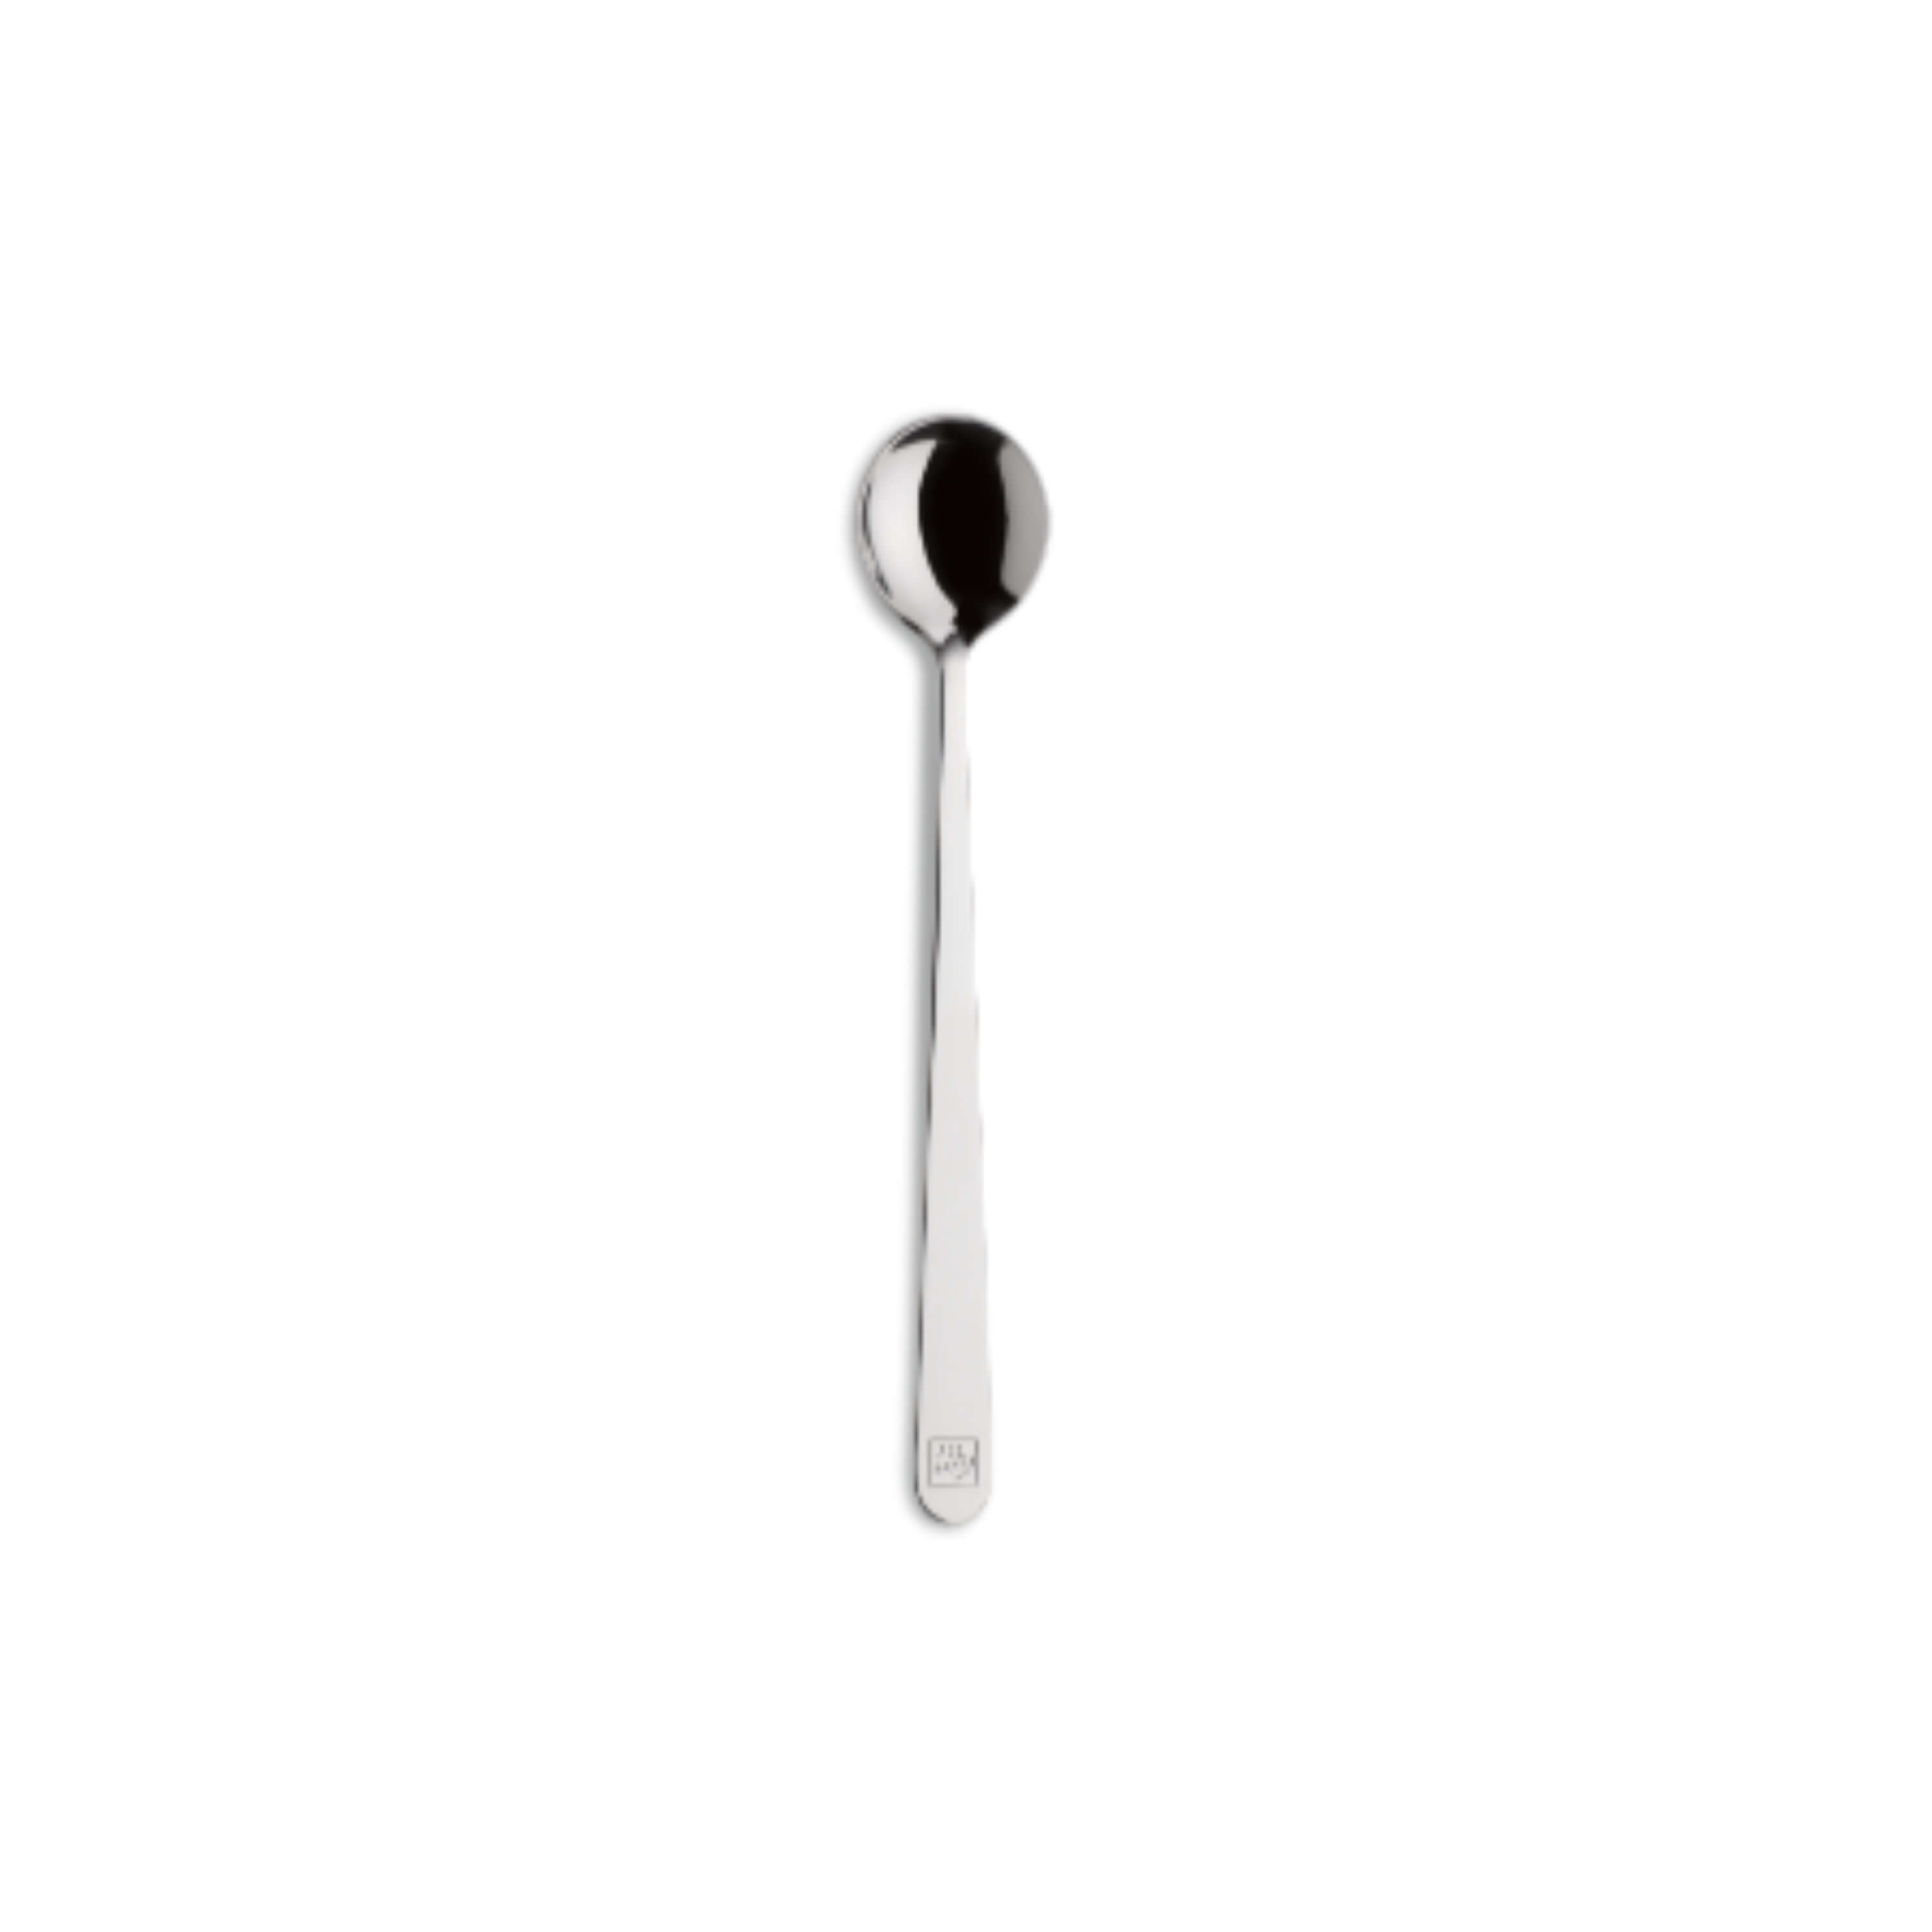 Pack of illy Girotondo Spoons BIG (6 pcs), Coffee Accessories, 02-06-0052